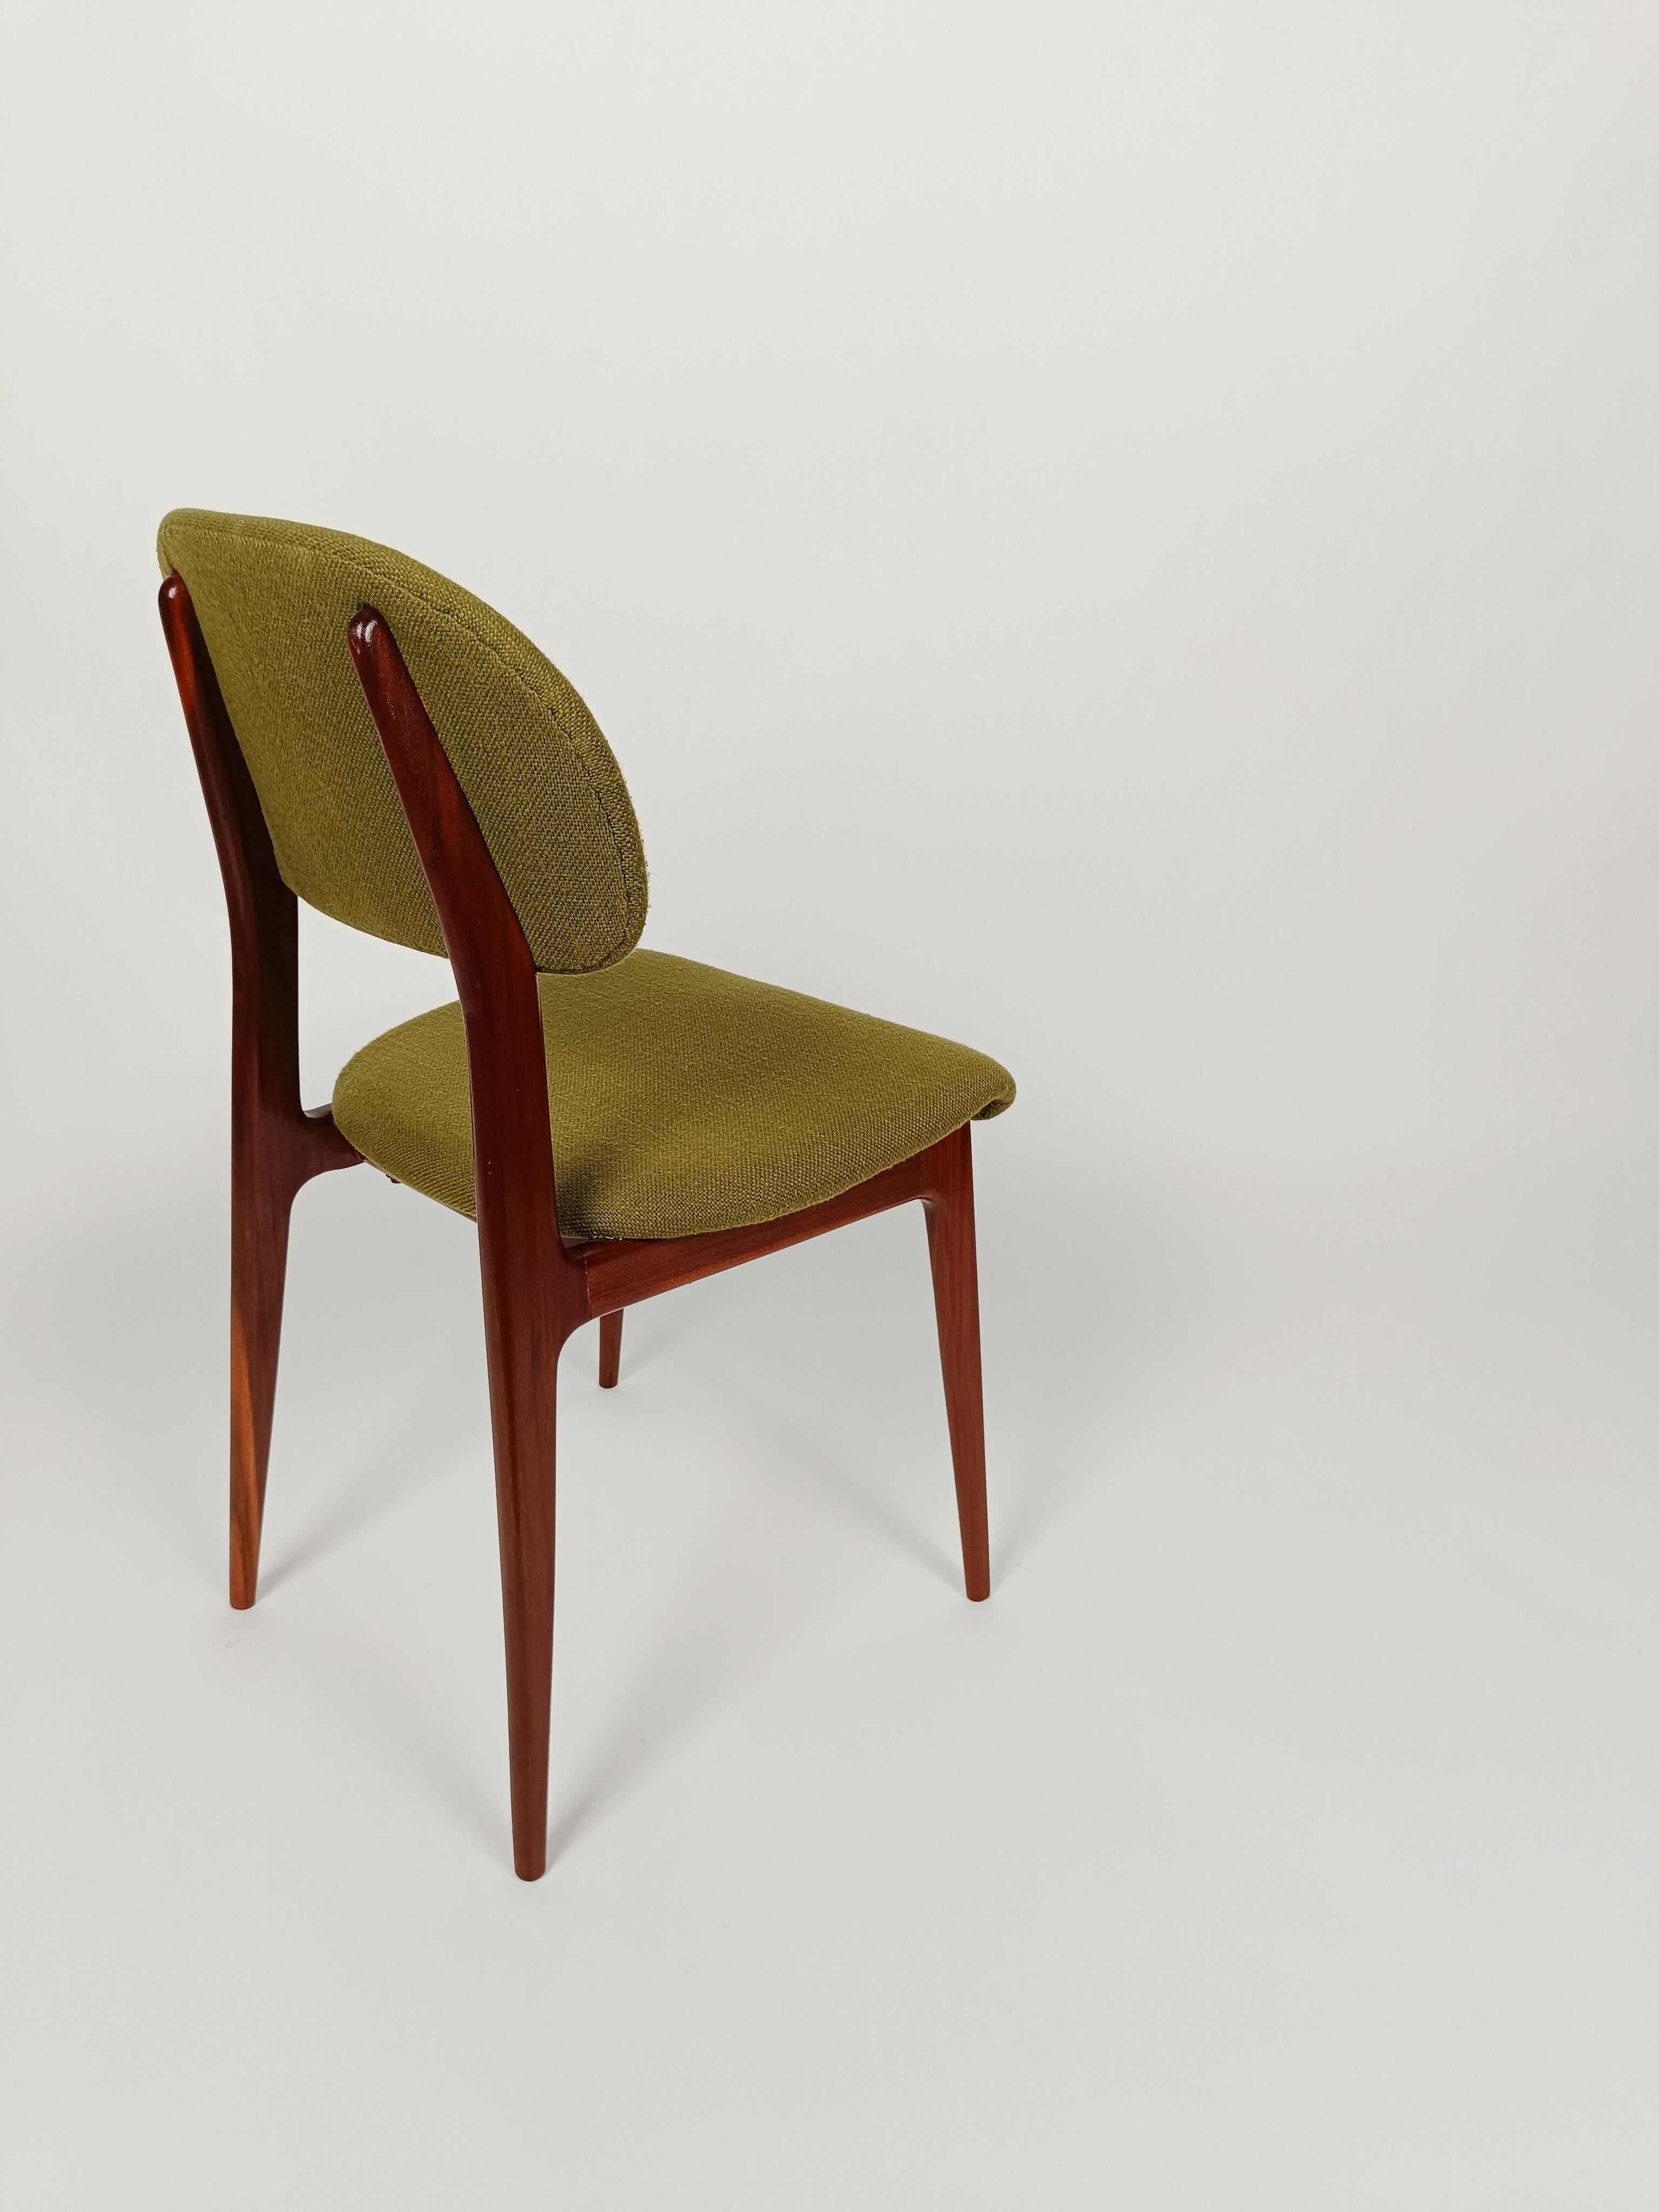 Italian Midcentury Chairs Attributed to Carlo Hauner and Martin Eisler, 1960s For Sale 7